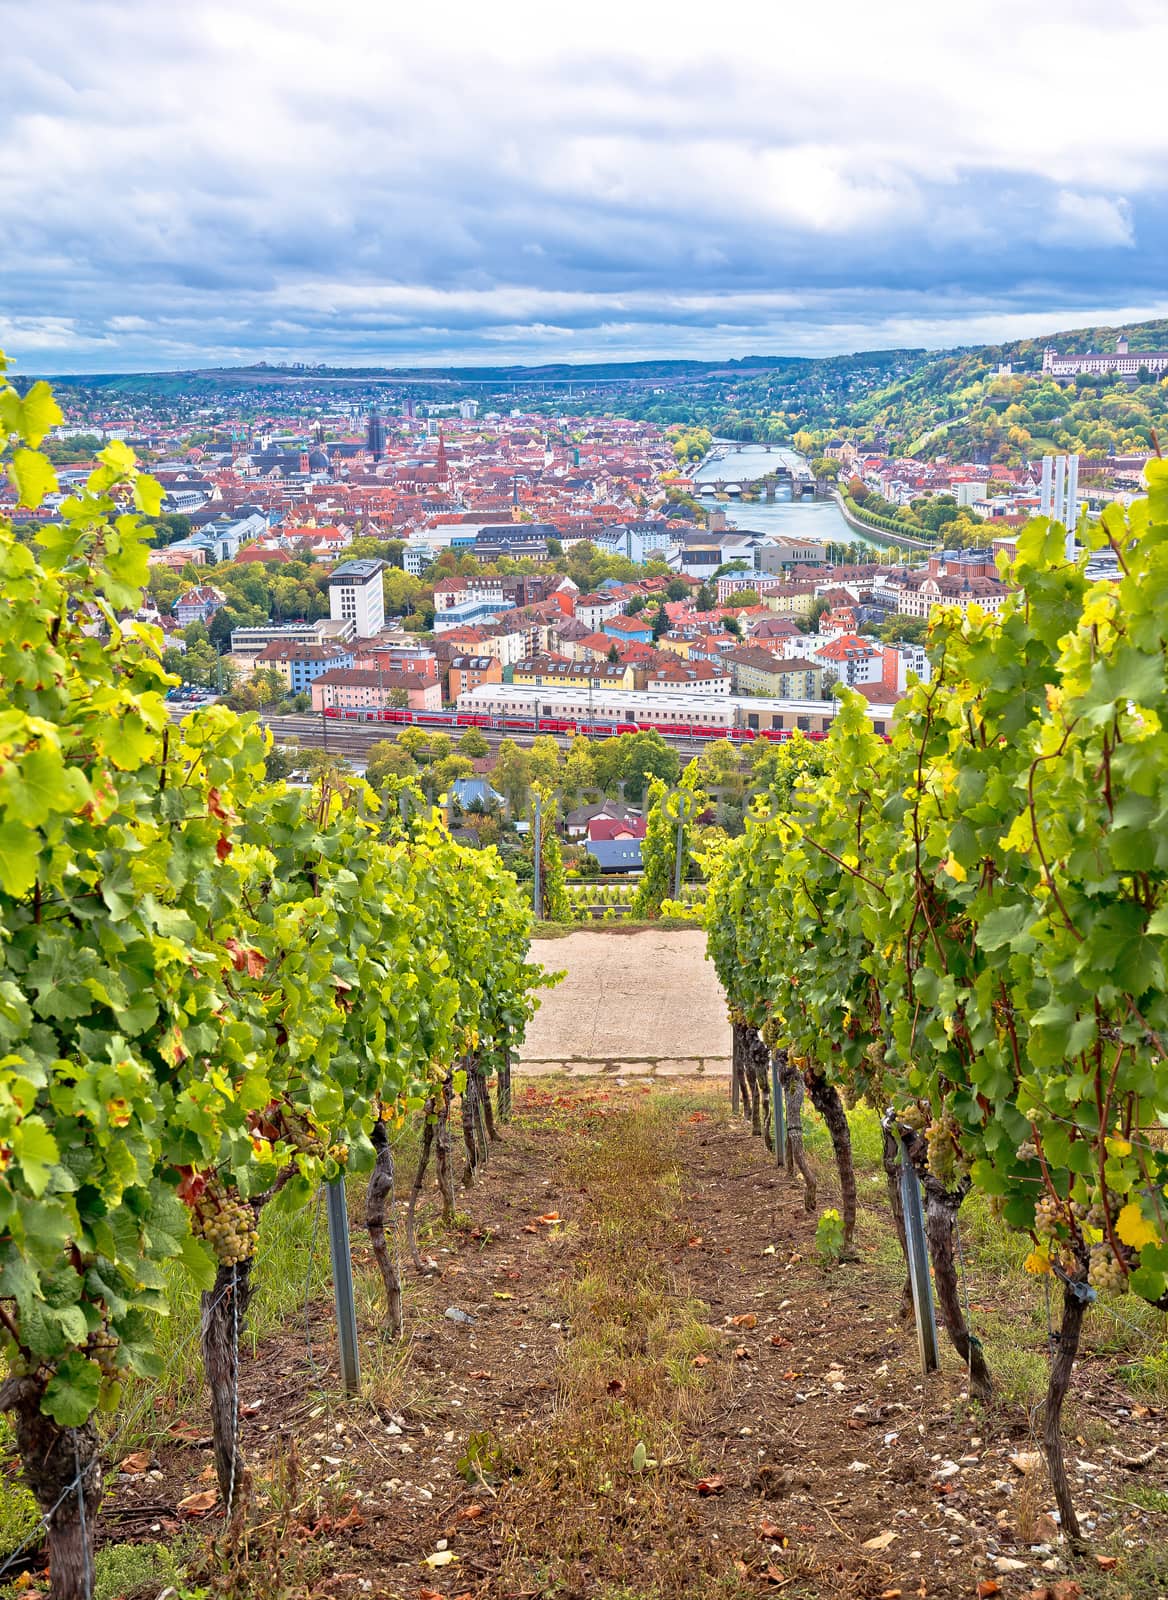 Old town of Wurzburg view from the vineyard hill by xbrchx